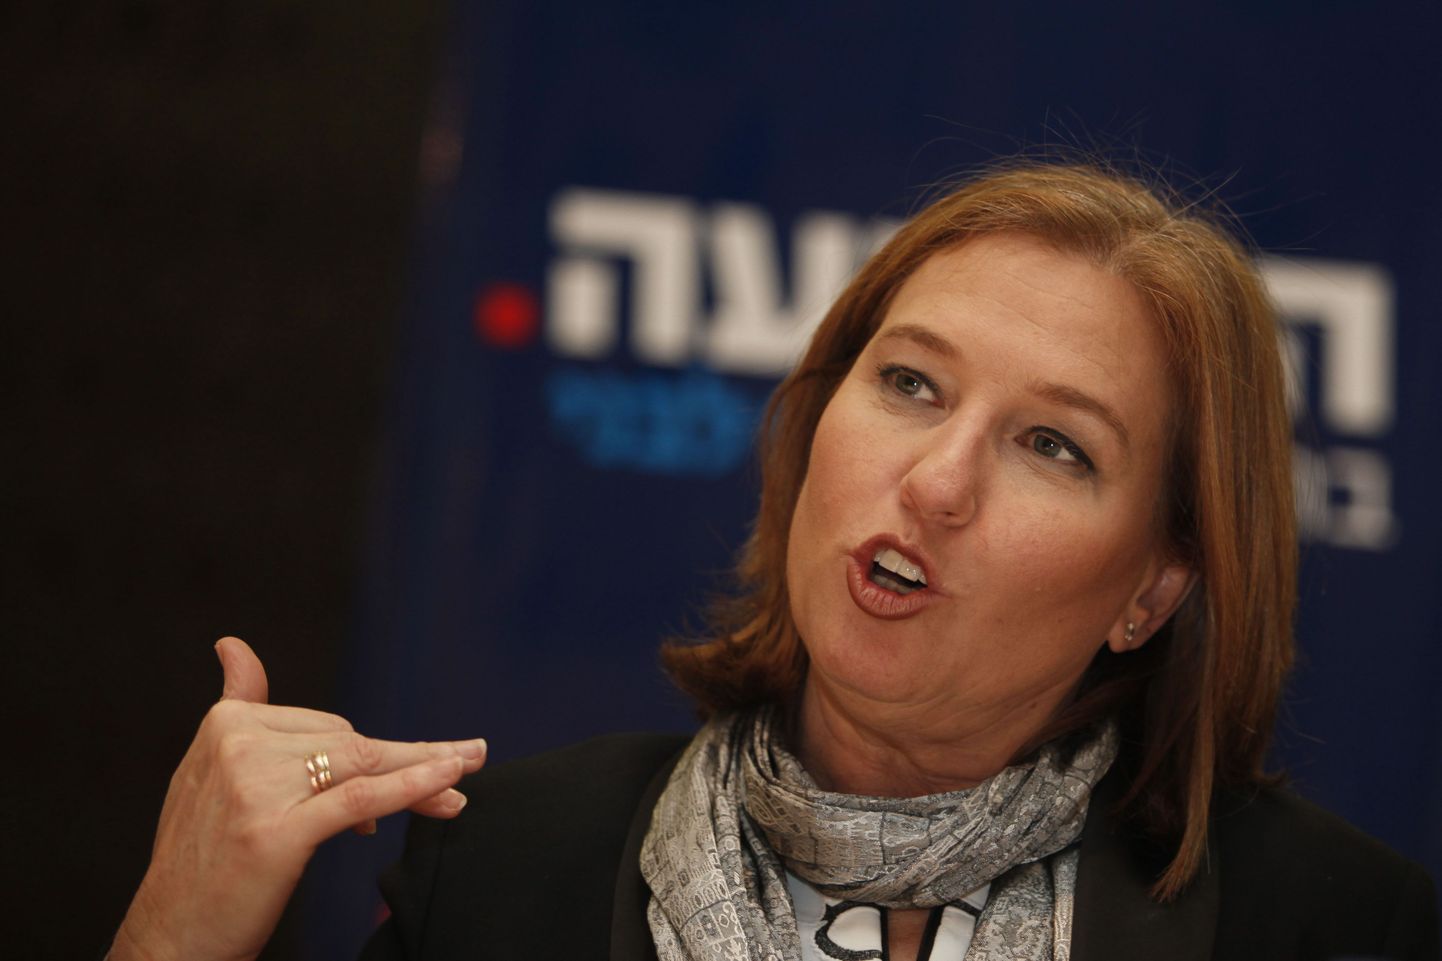 Israeli former foreign minister and chairman of a new party called The Movement, Tzipi Livni, gestures during an election event with women in Jerusalem, on January 15, 2013. Israel will go to the polls on January 22. AFP PHOTO/GALI TIBBON